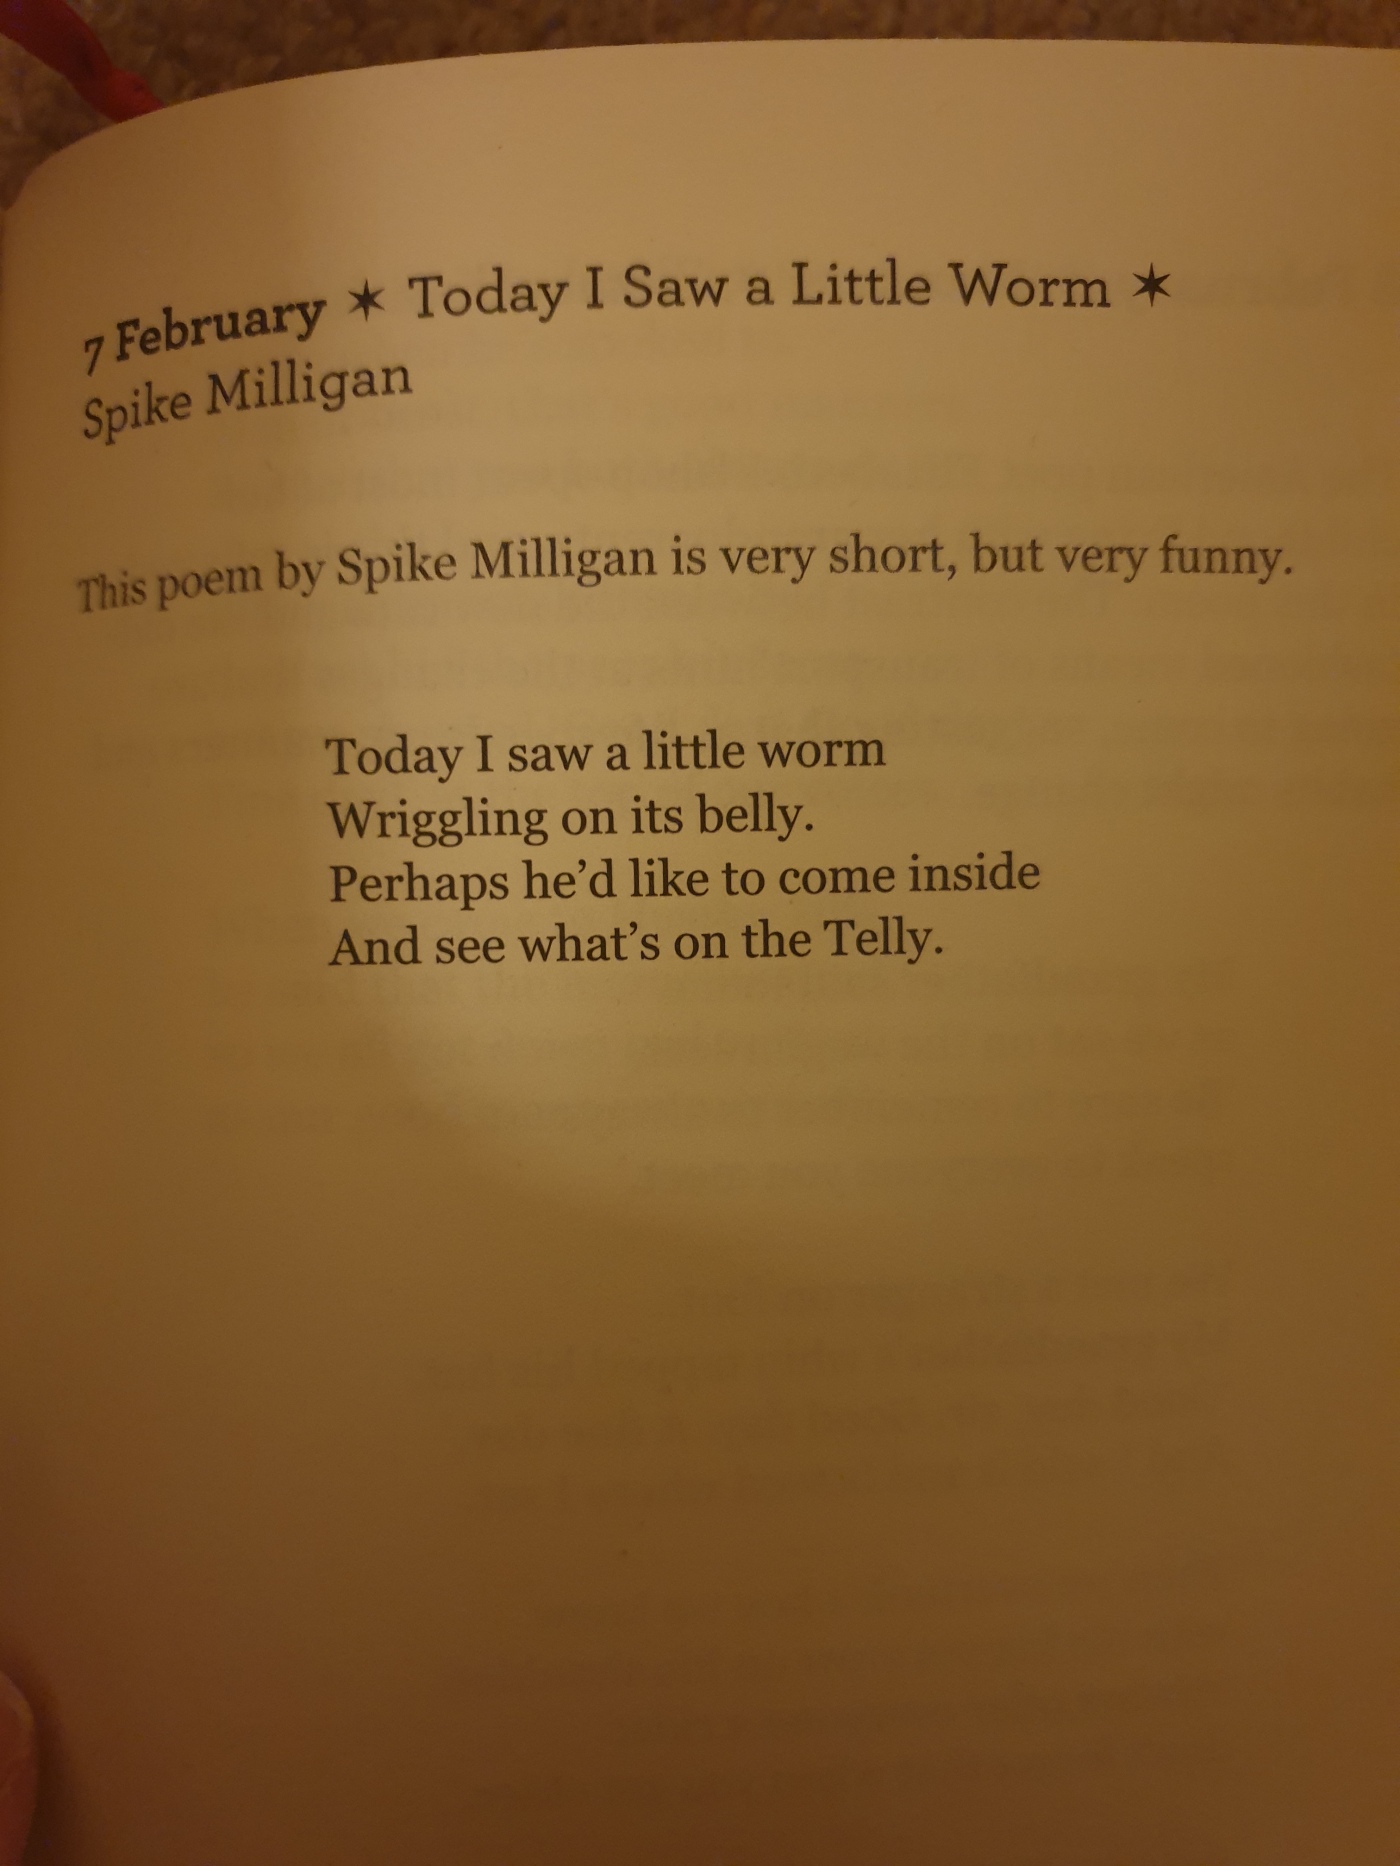 poem 38 today i saw a little worm by spike milligan